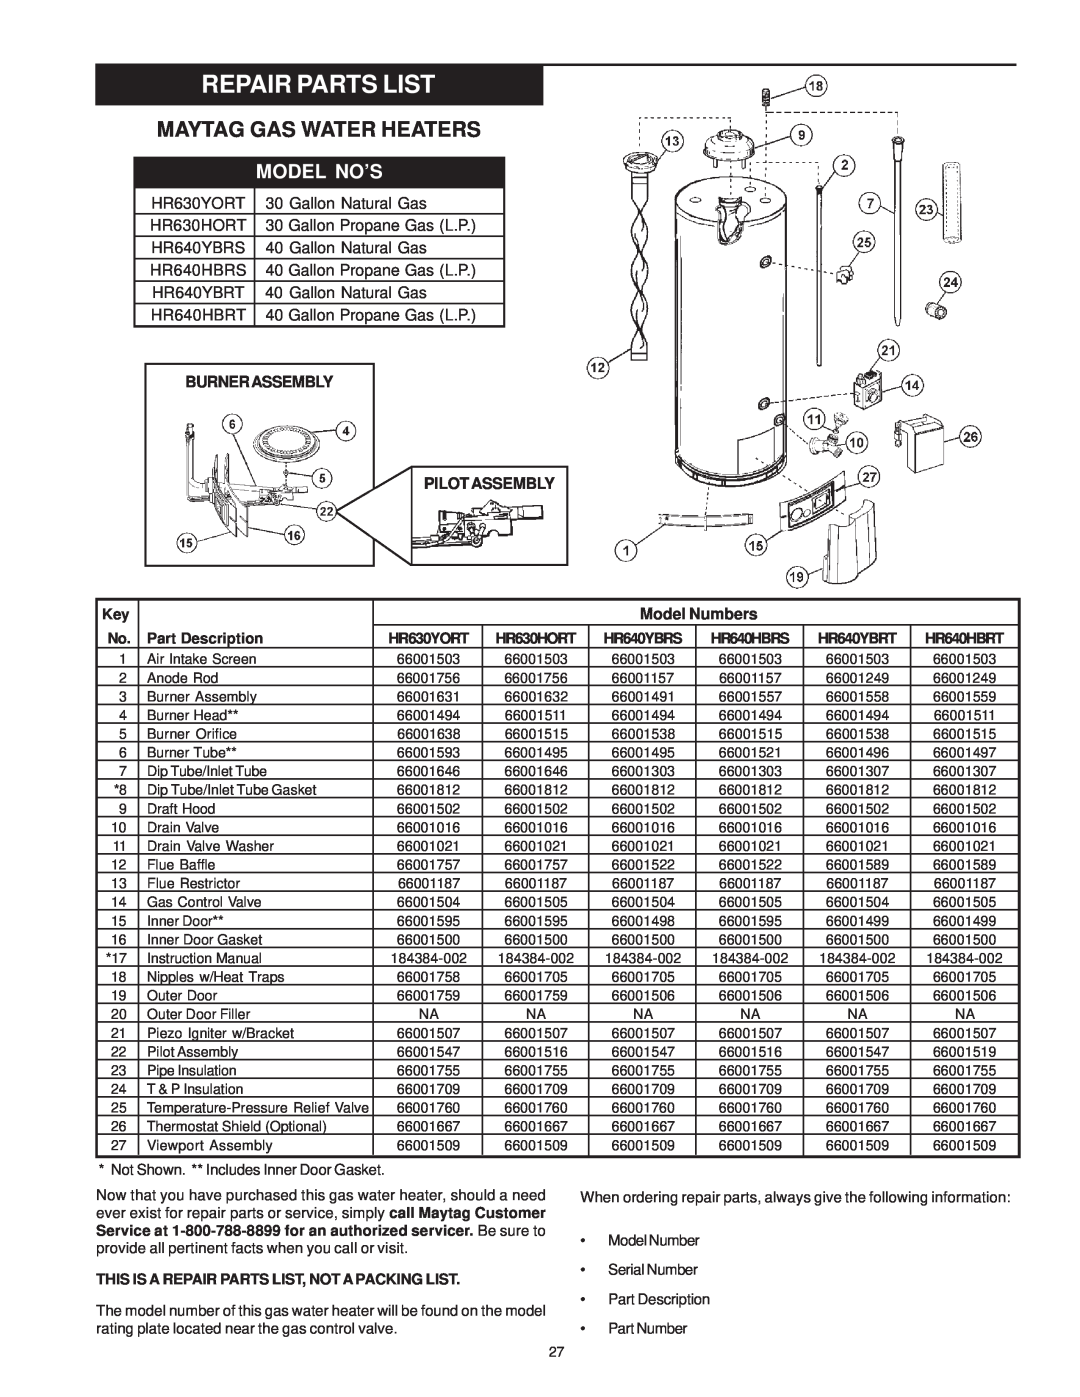 Maytag C3 manual Repair Parts List, Maytag Gas Water Heaters, Model No’S, Burnerassembly Pilotassembly, Model Numbers 